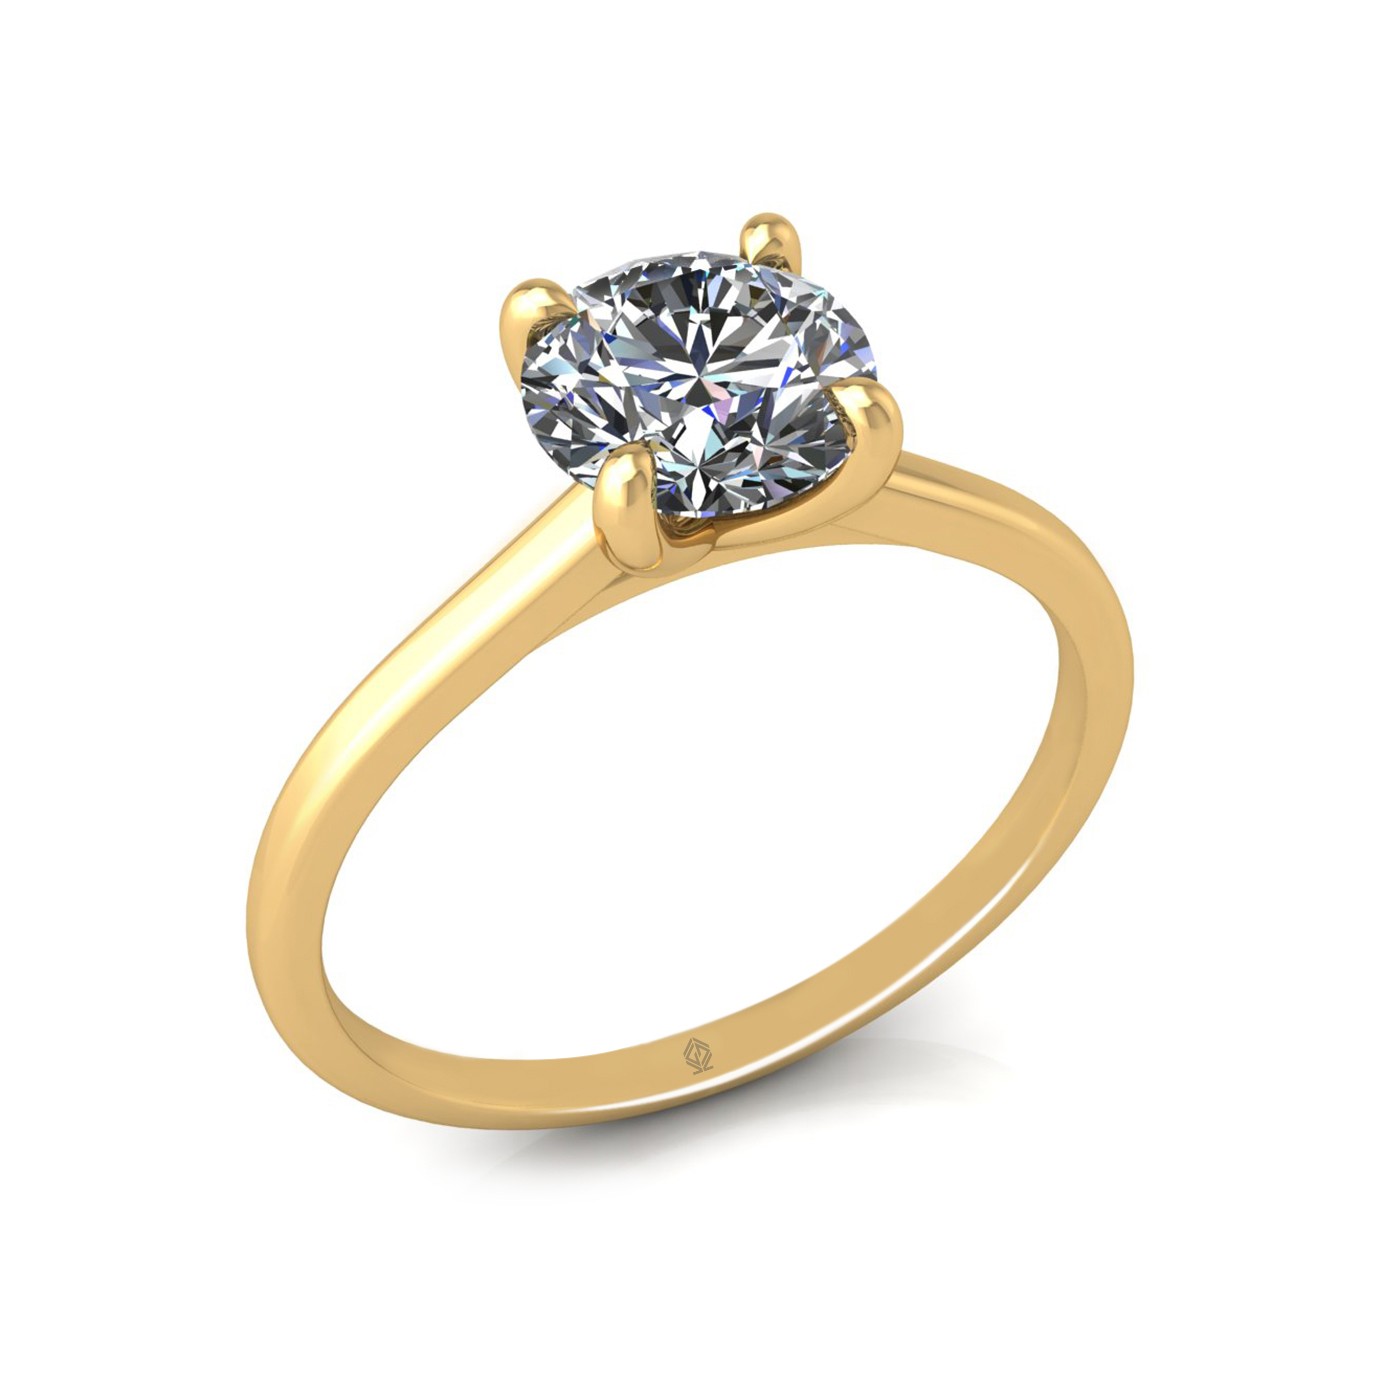 18k yellow gold  1.0ct 4 prongs solitaire round cut diamond engagement ring with whisper thin band